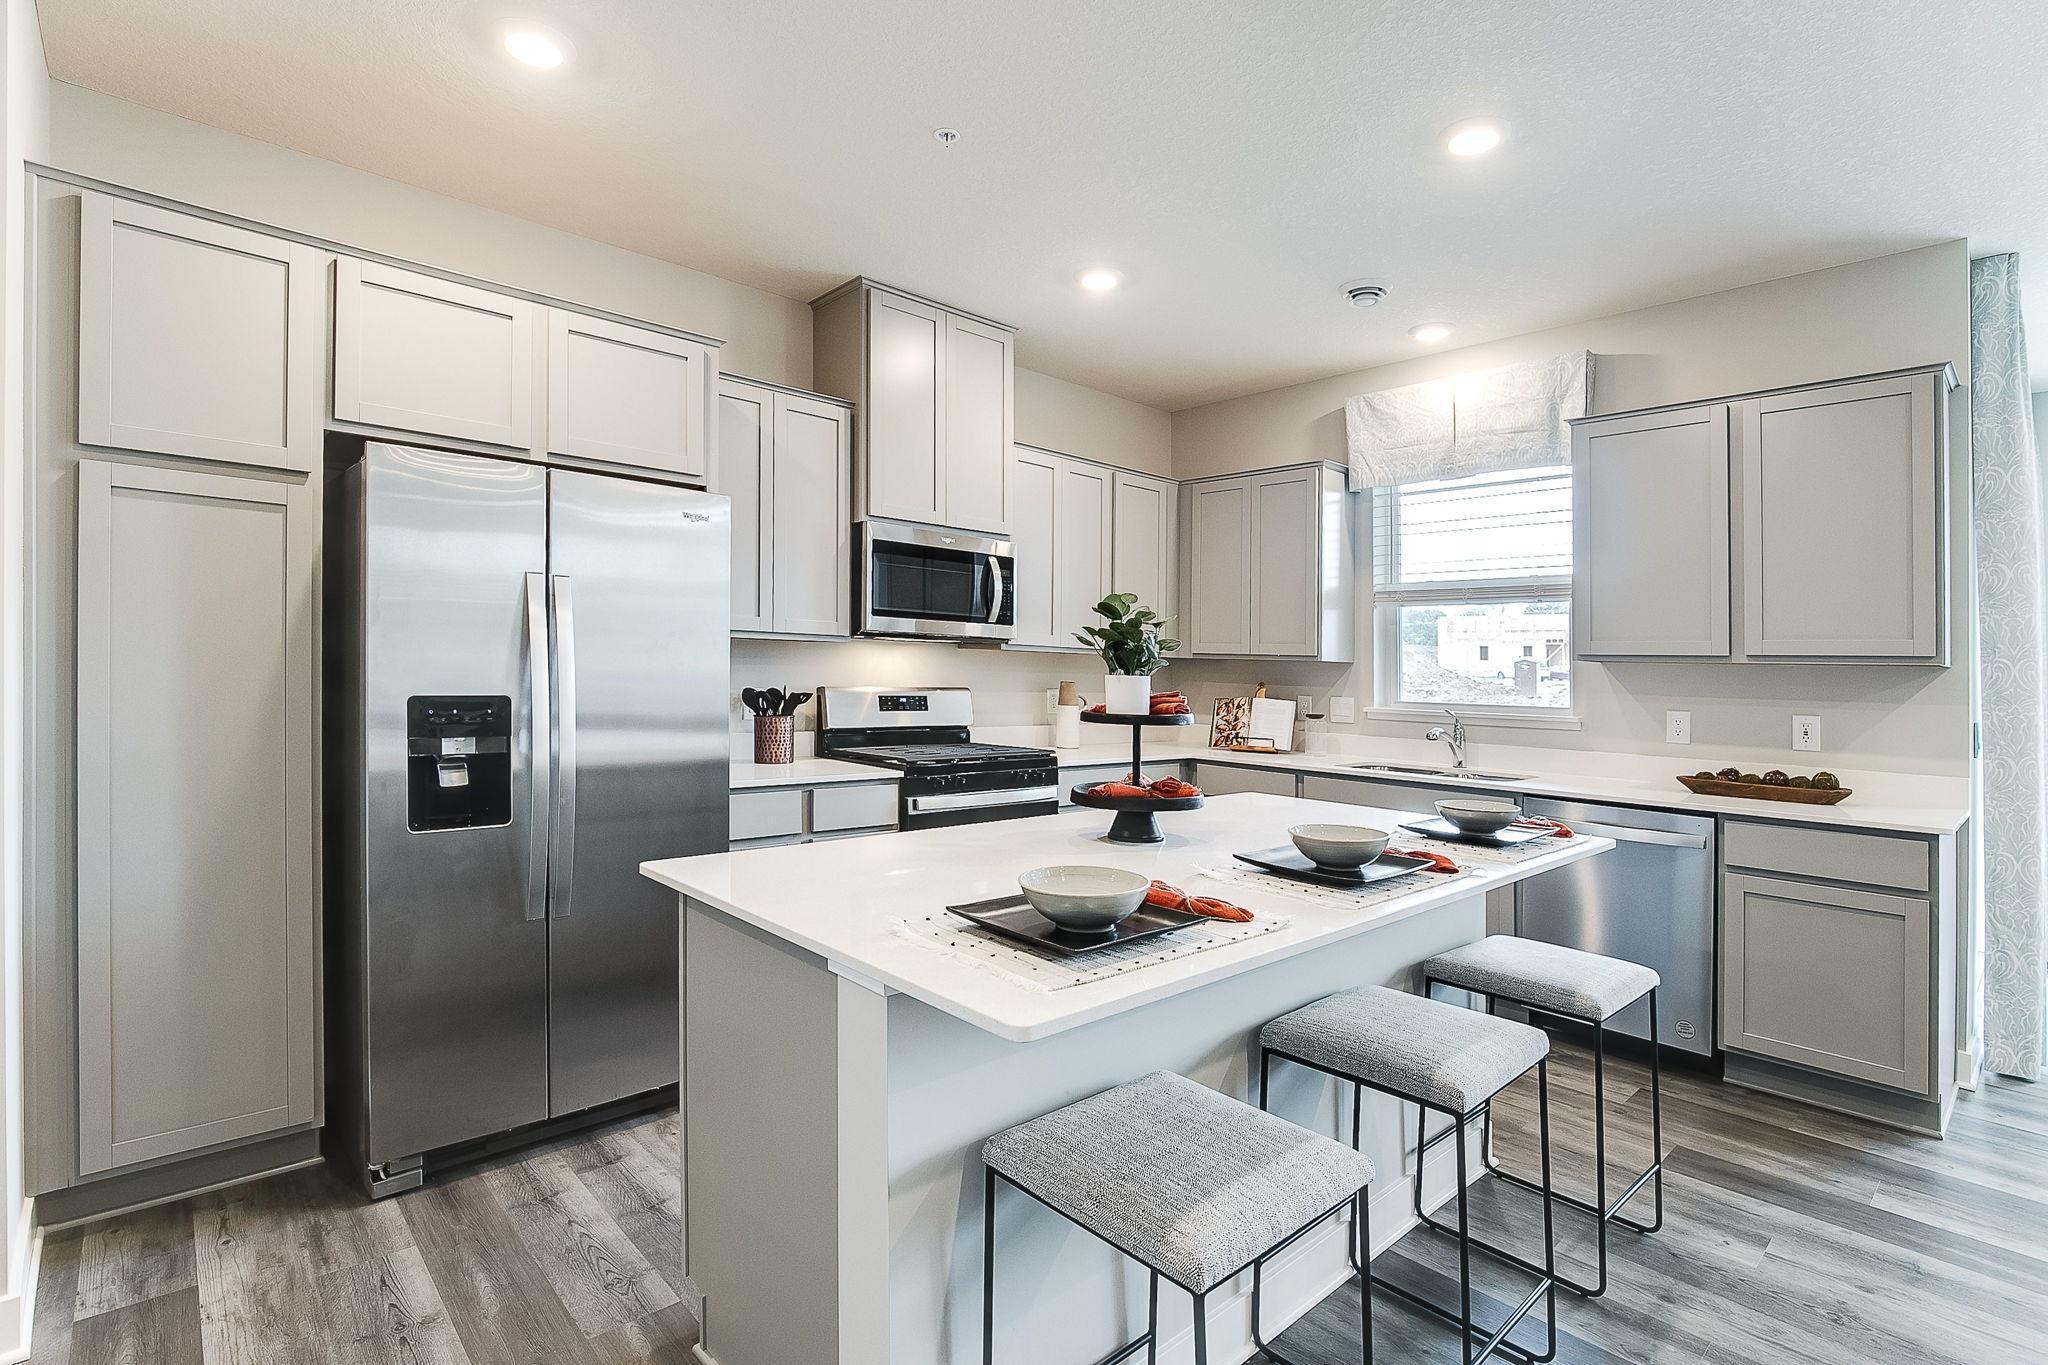 Welcome to D.R. Horton's Fairmont in Copper Hills community! A beautiful and spacious 3-bedroom interior unit featuring a covered patio and deck off the primary bedroom suite! *Photo is of model home, colors and selections shown may vary.